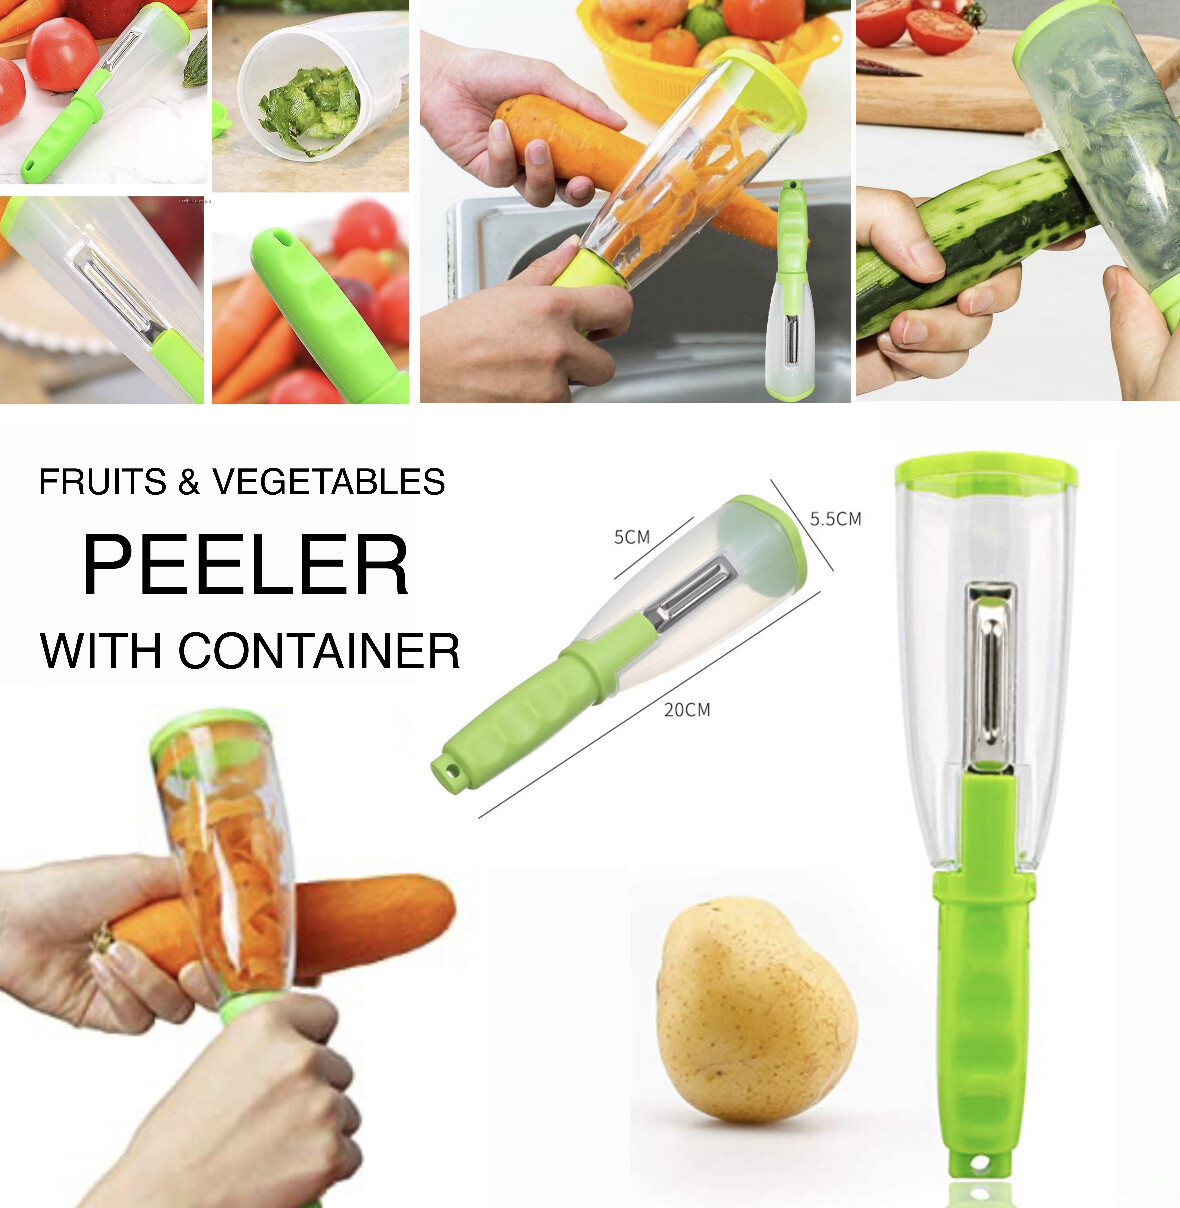 Peeler With Container